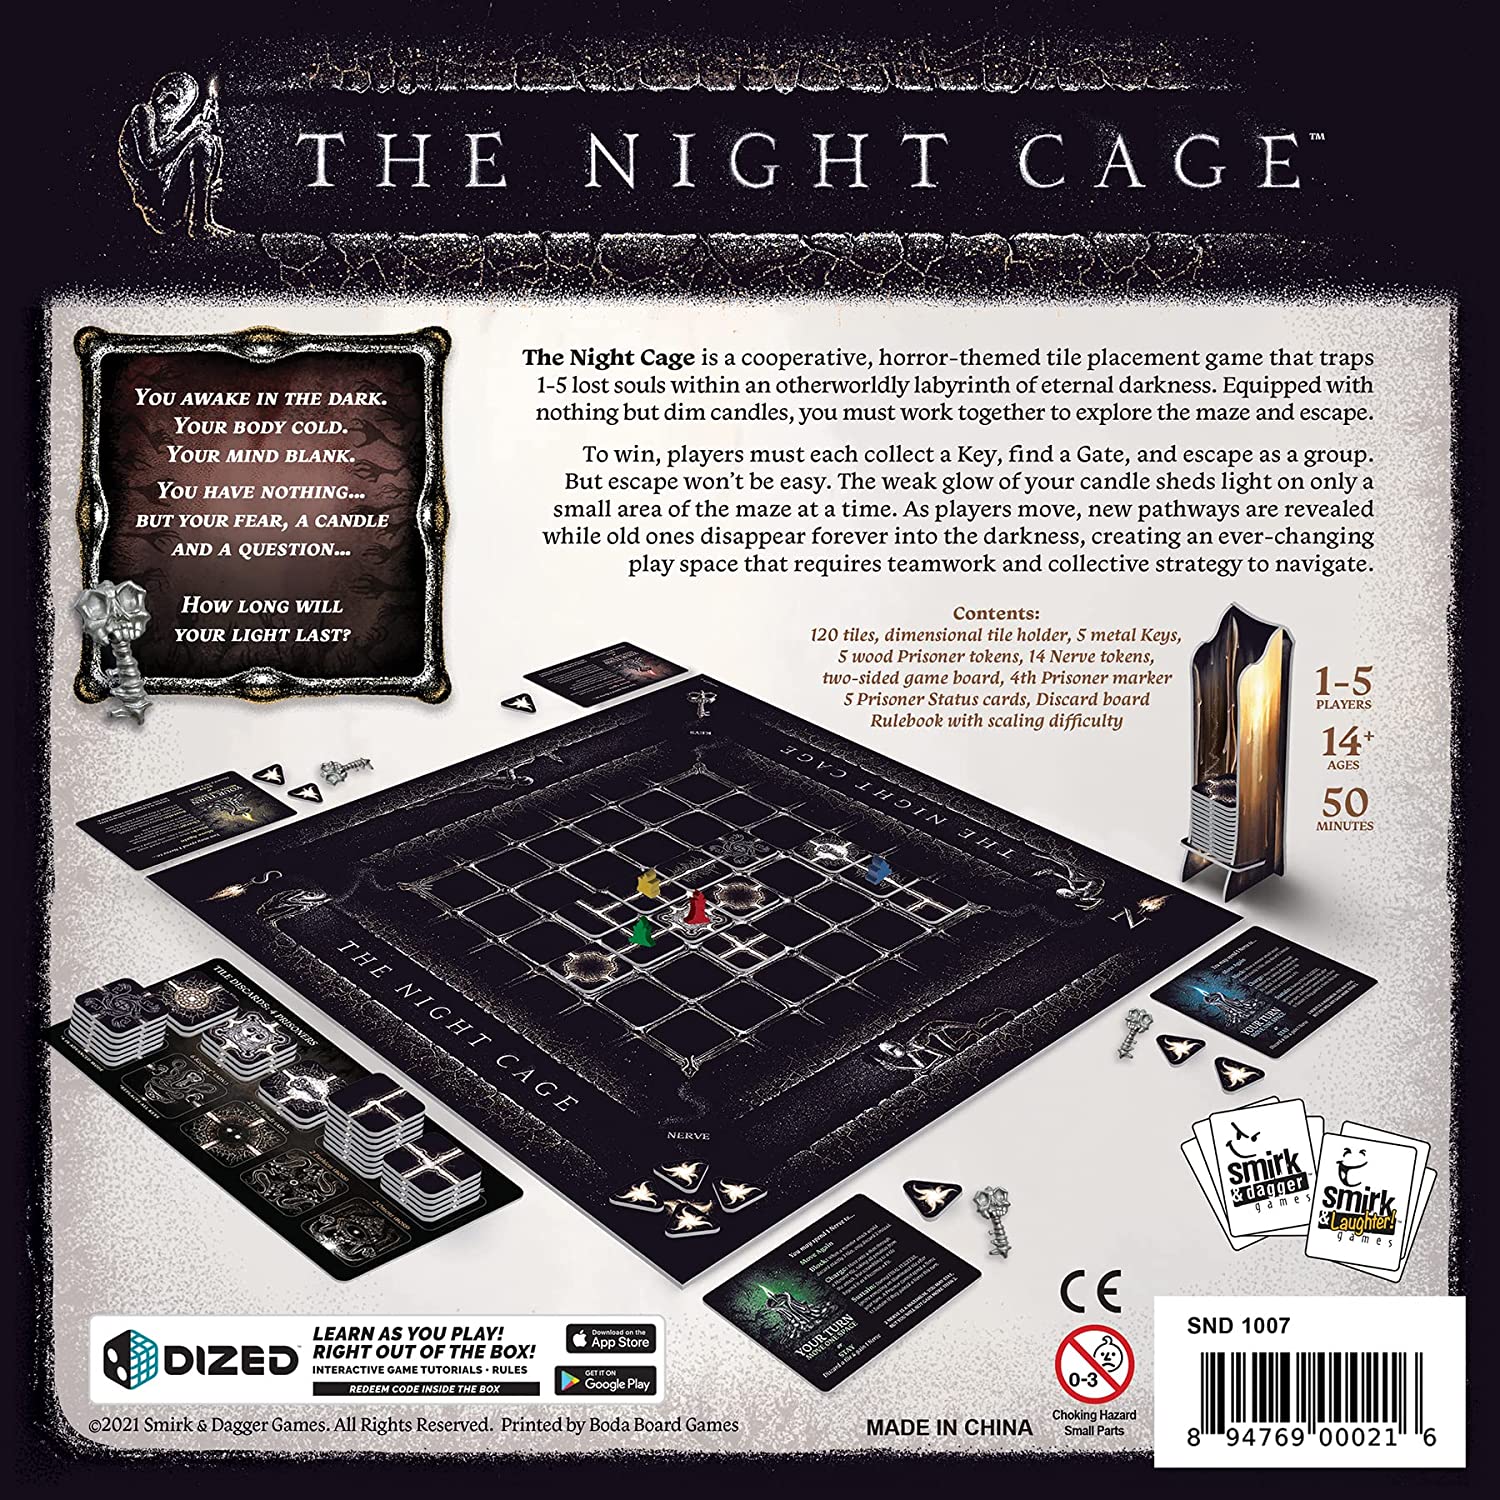 Find out about The Night Cage